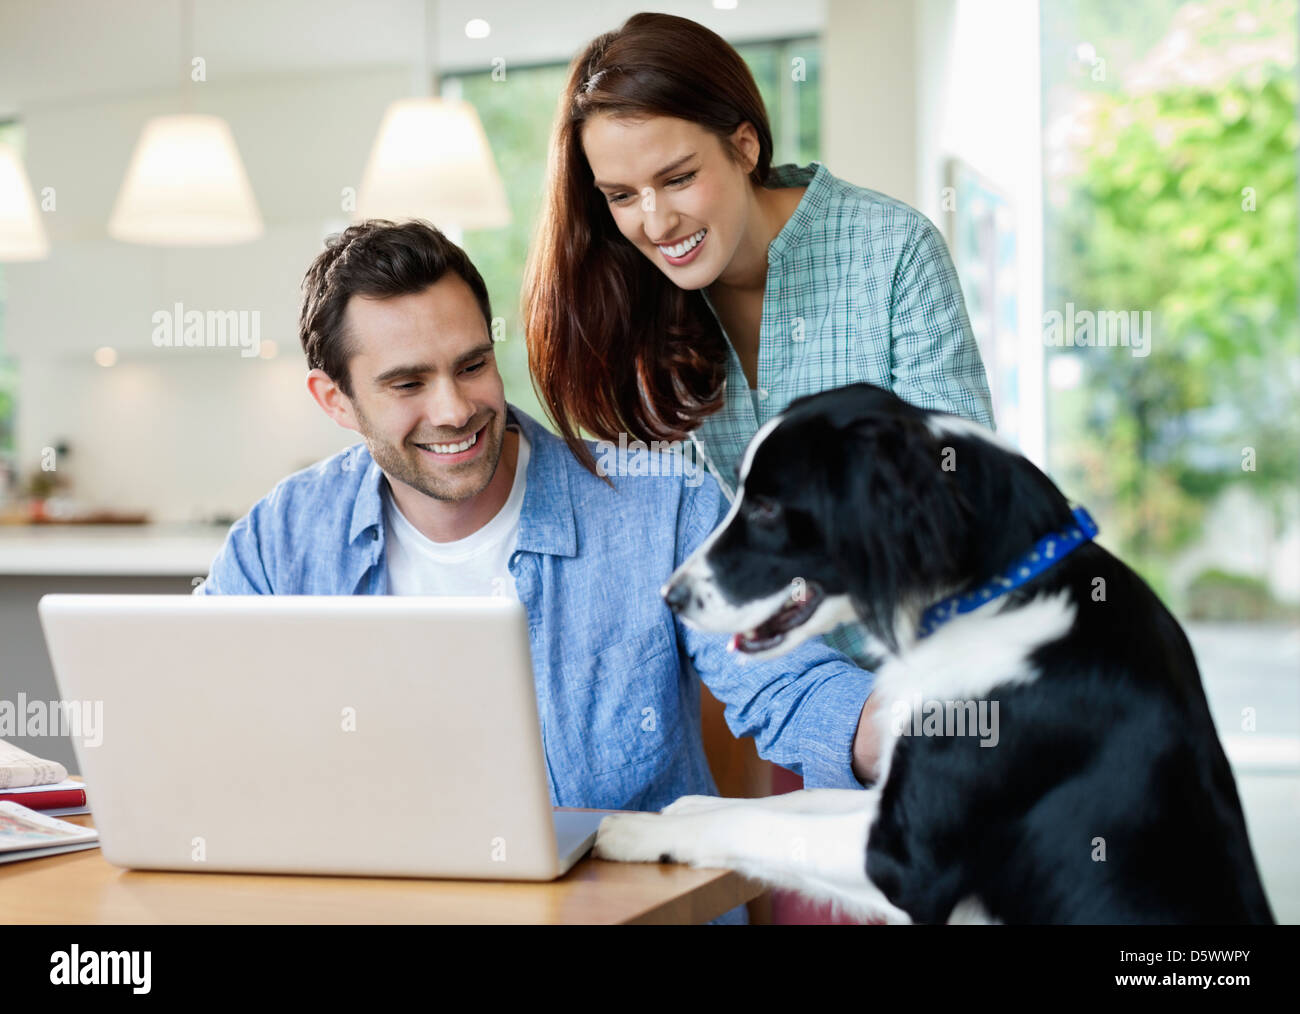 Couple petting dog at table Stock Photo